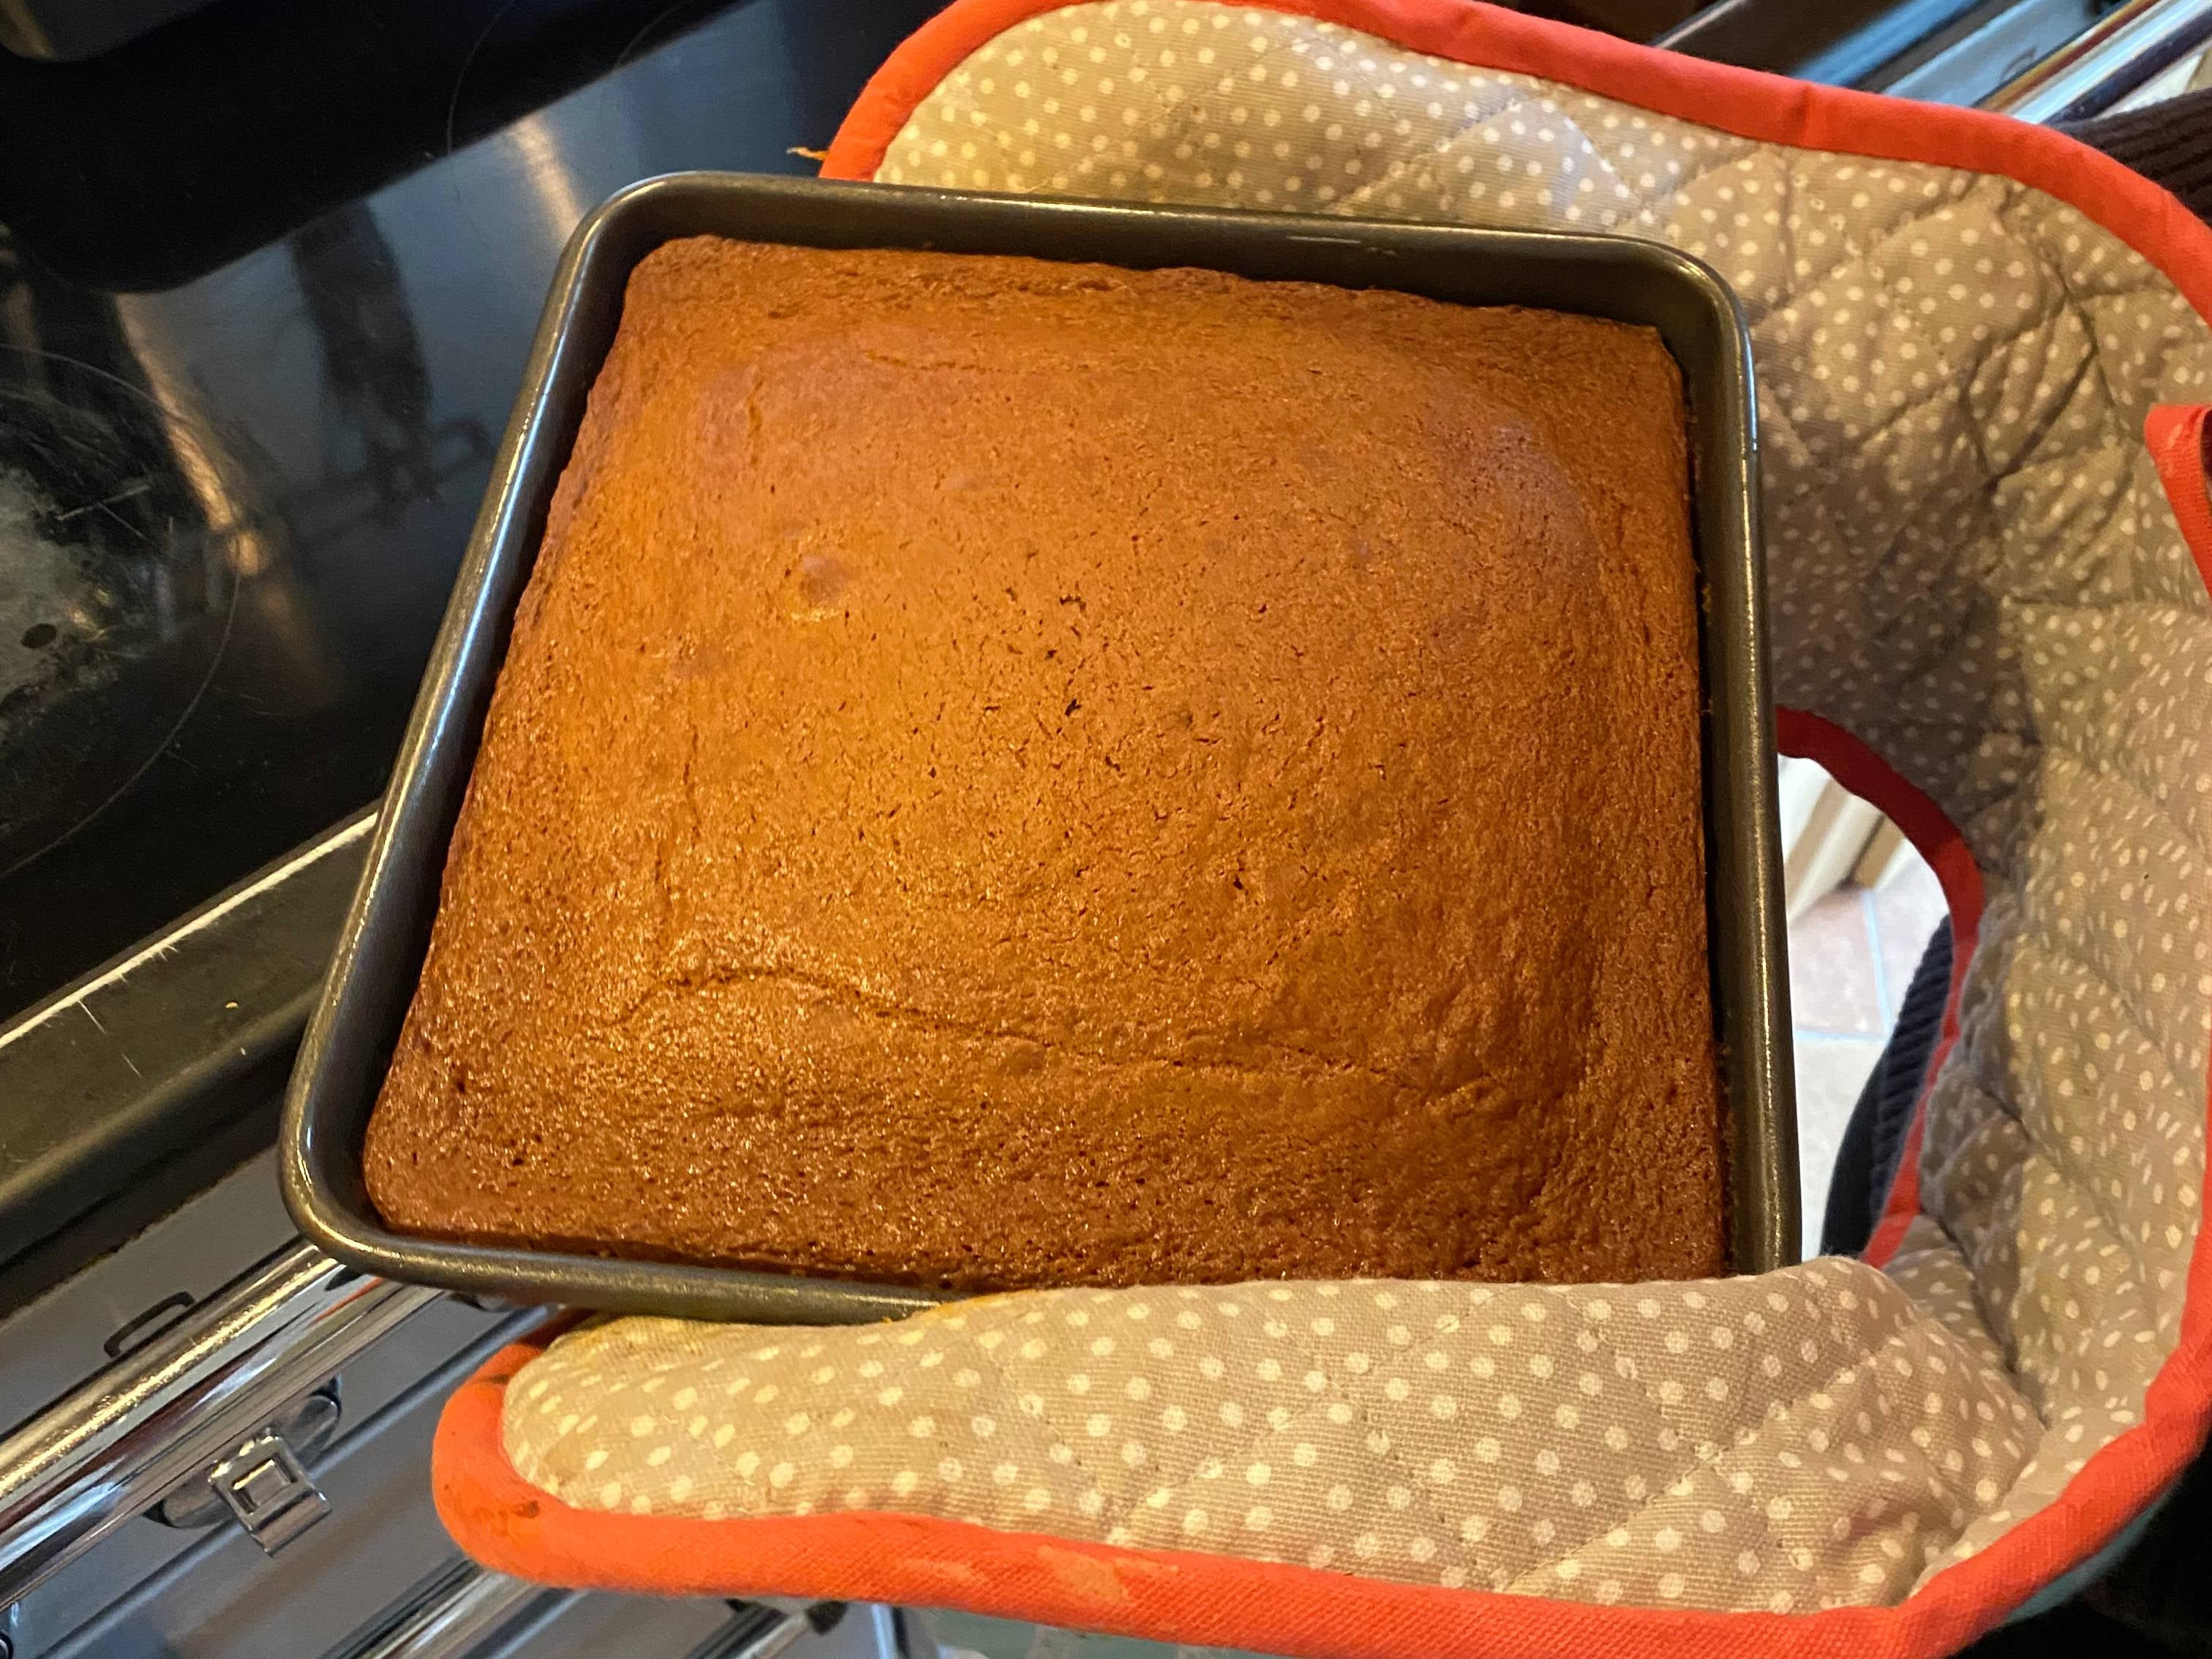 Freshly baked cake mixture for Nigella and Mary Berry's sticky toffee pudding recipes